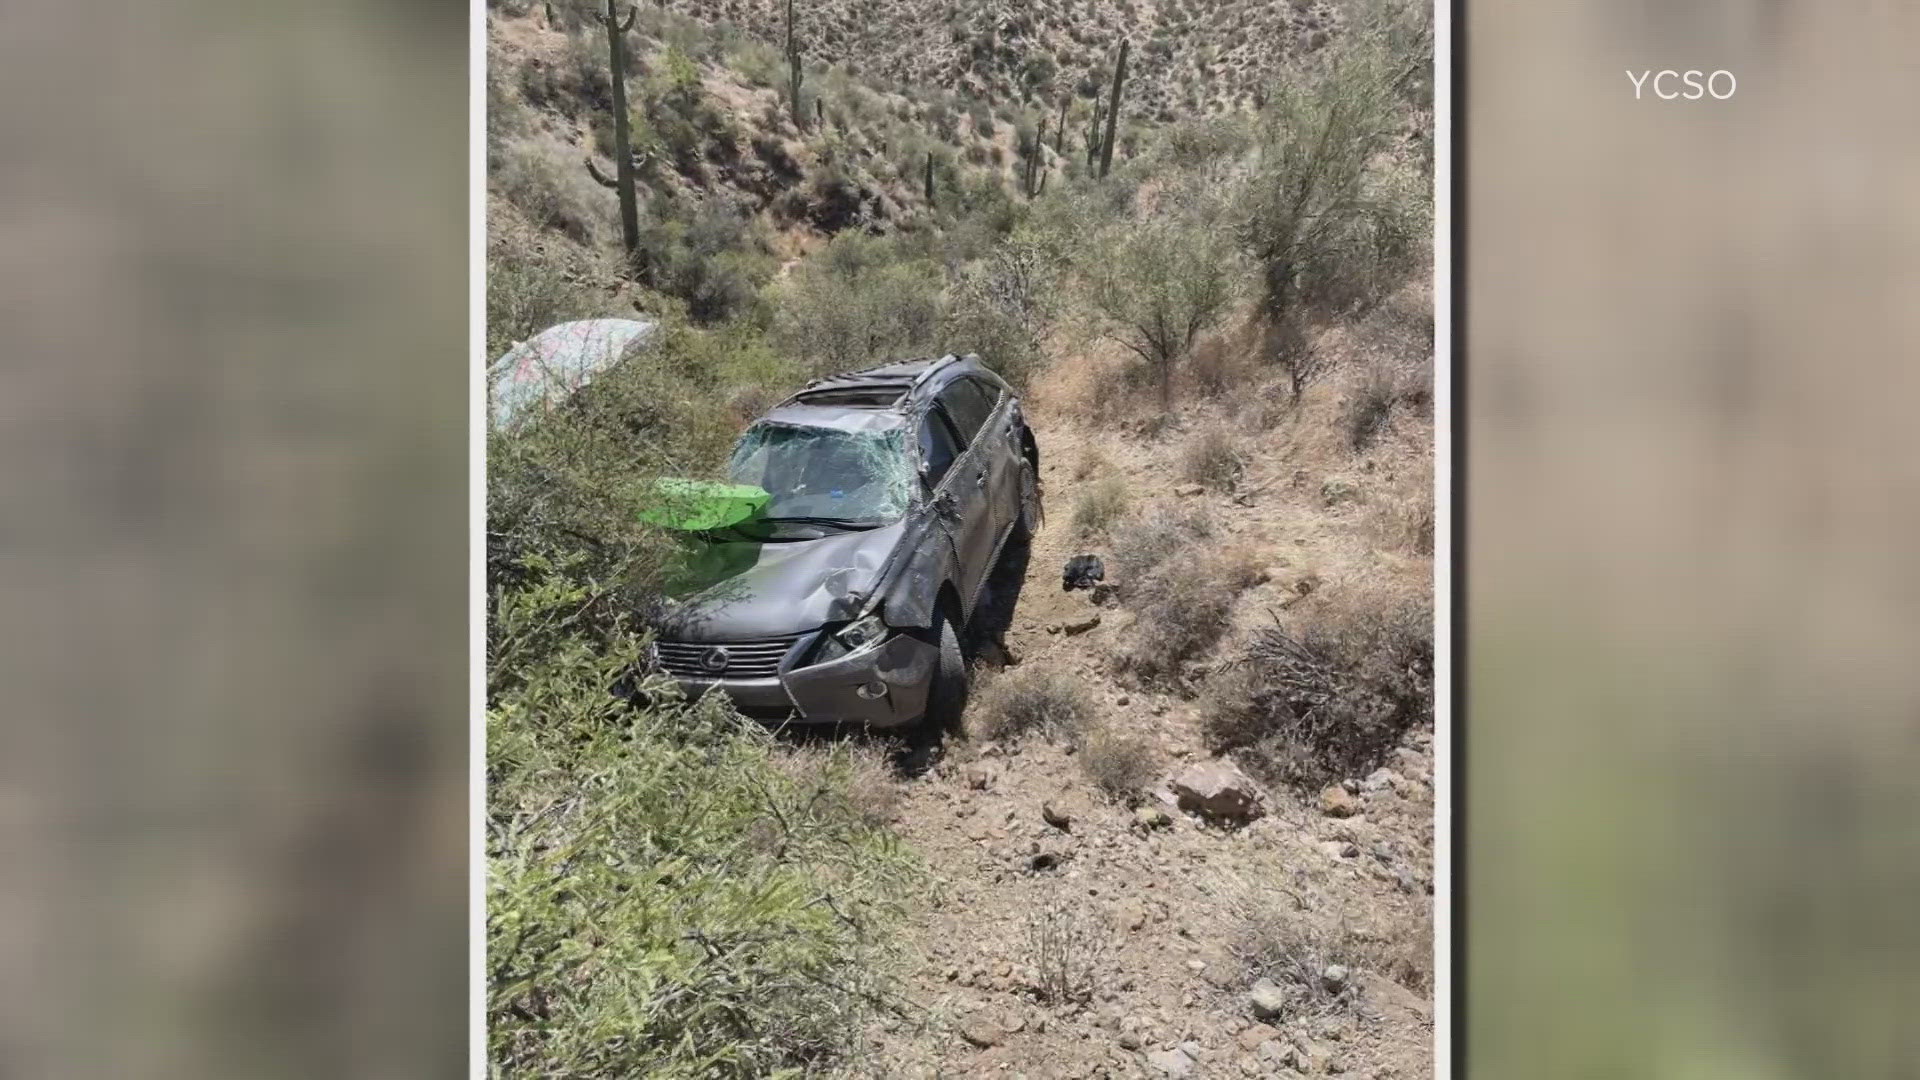 The driver survived off of snacks and some water before she was rescued on the morning of June 15.